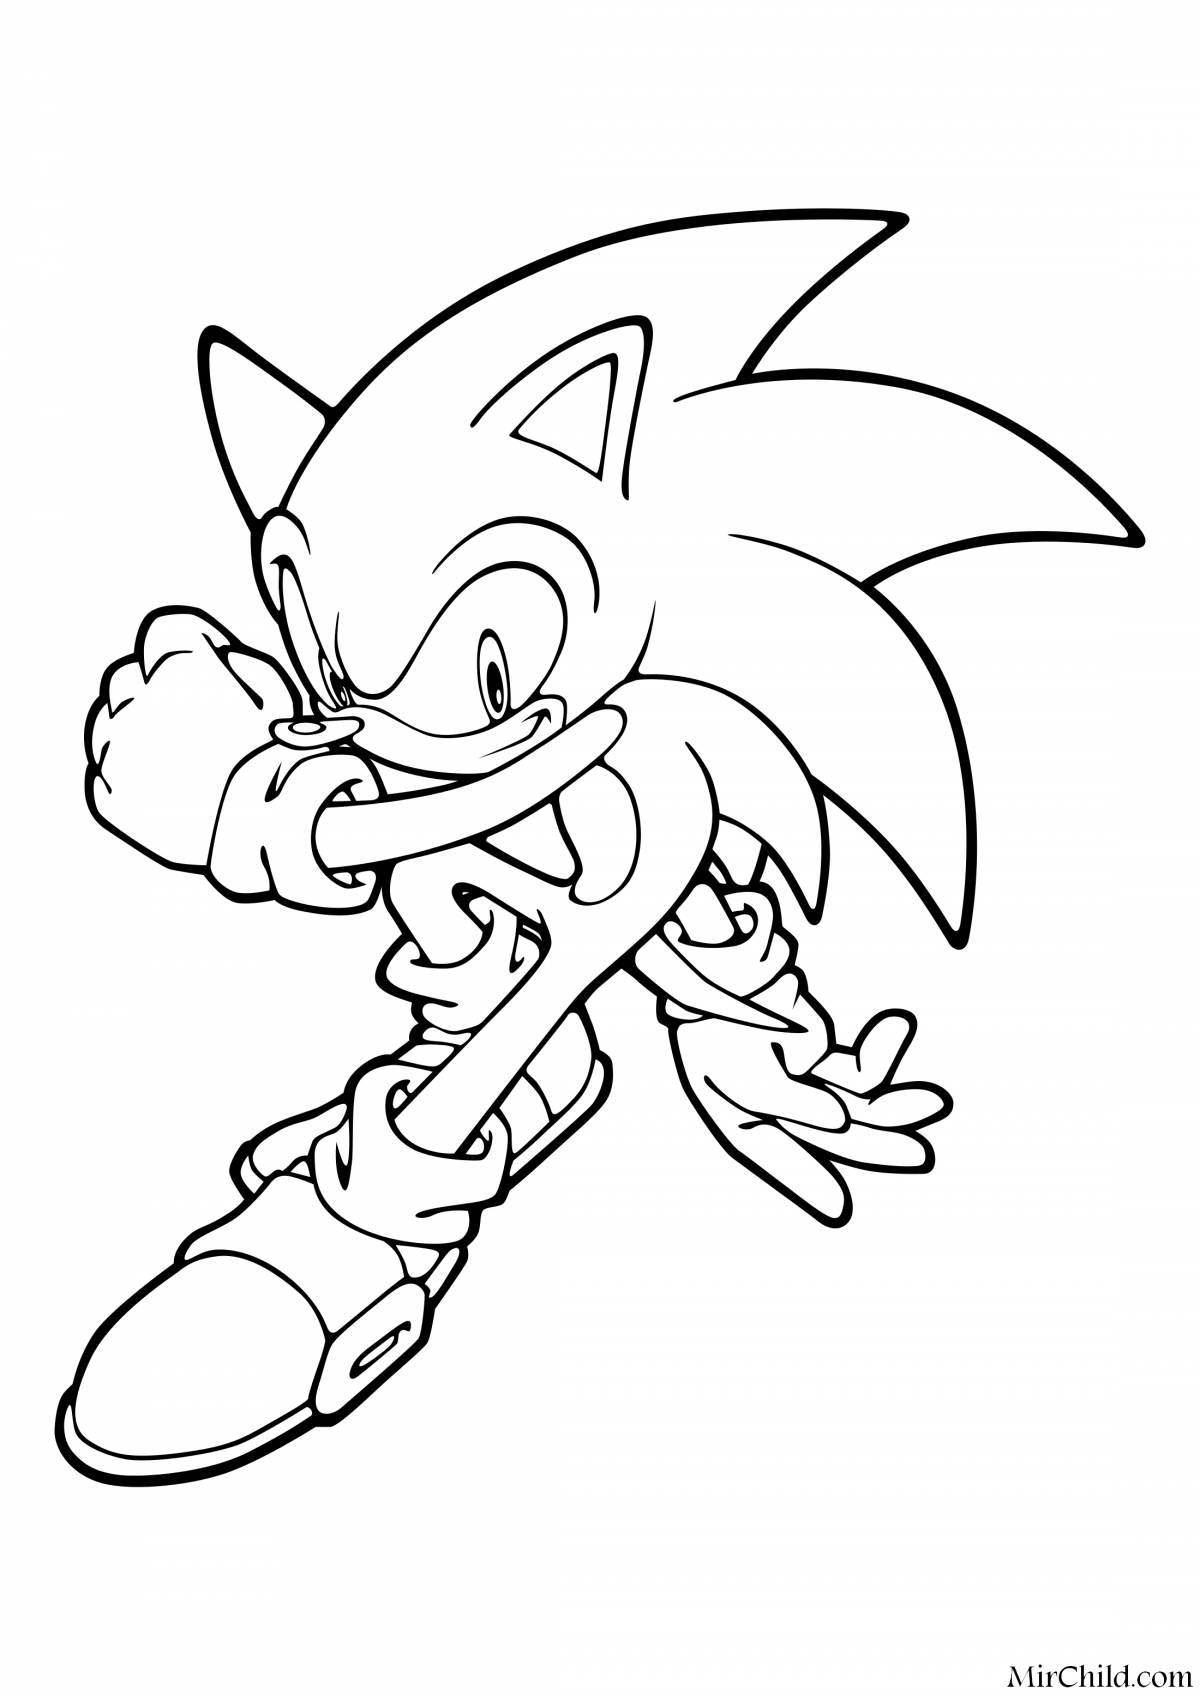 Animated sonic coloring book